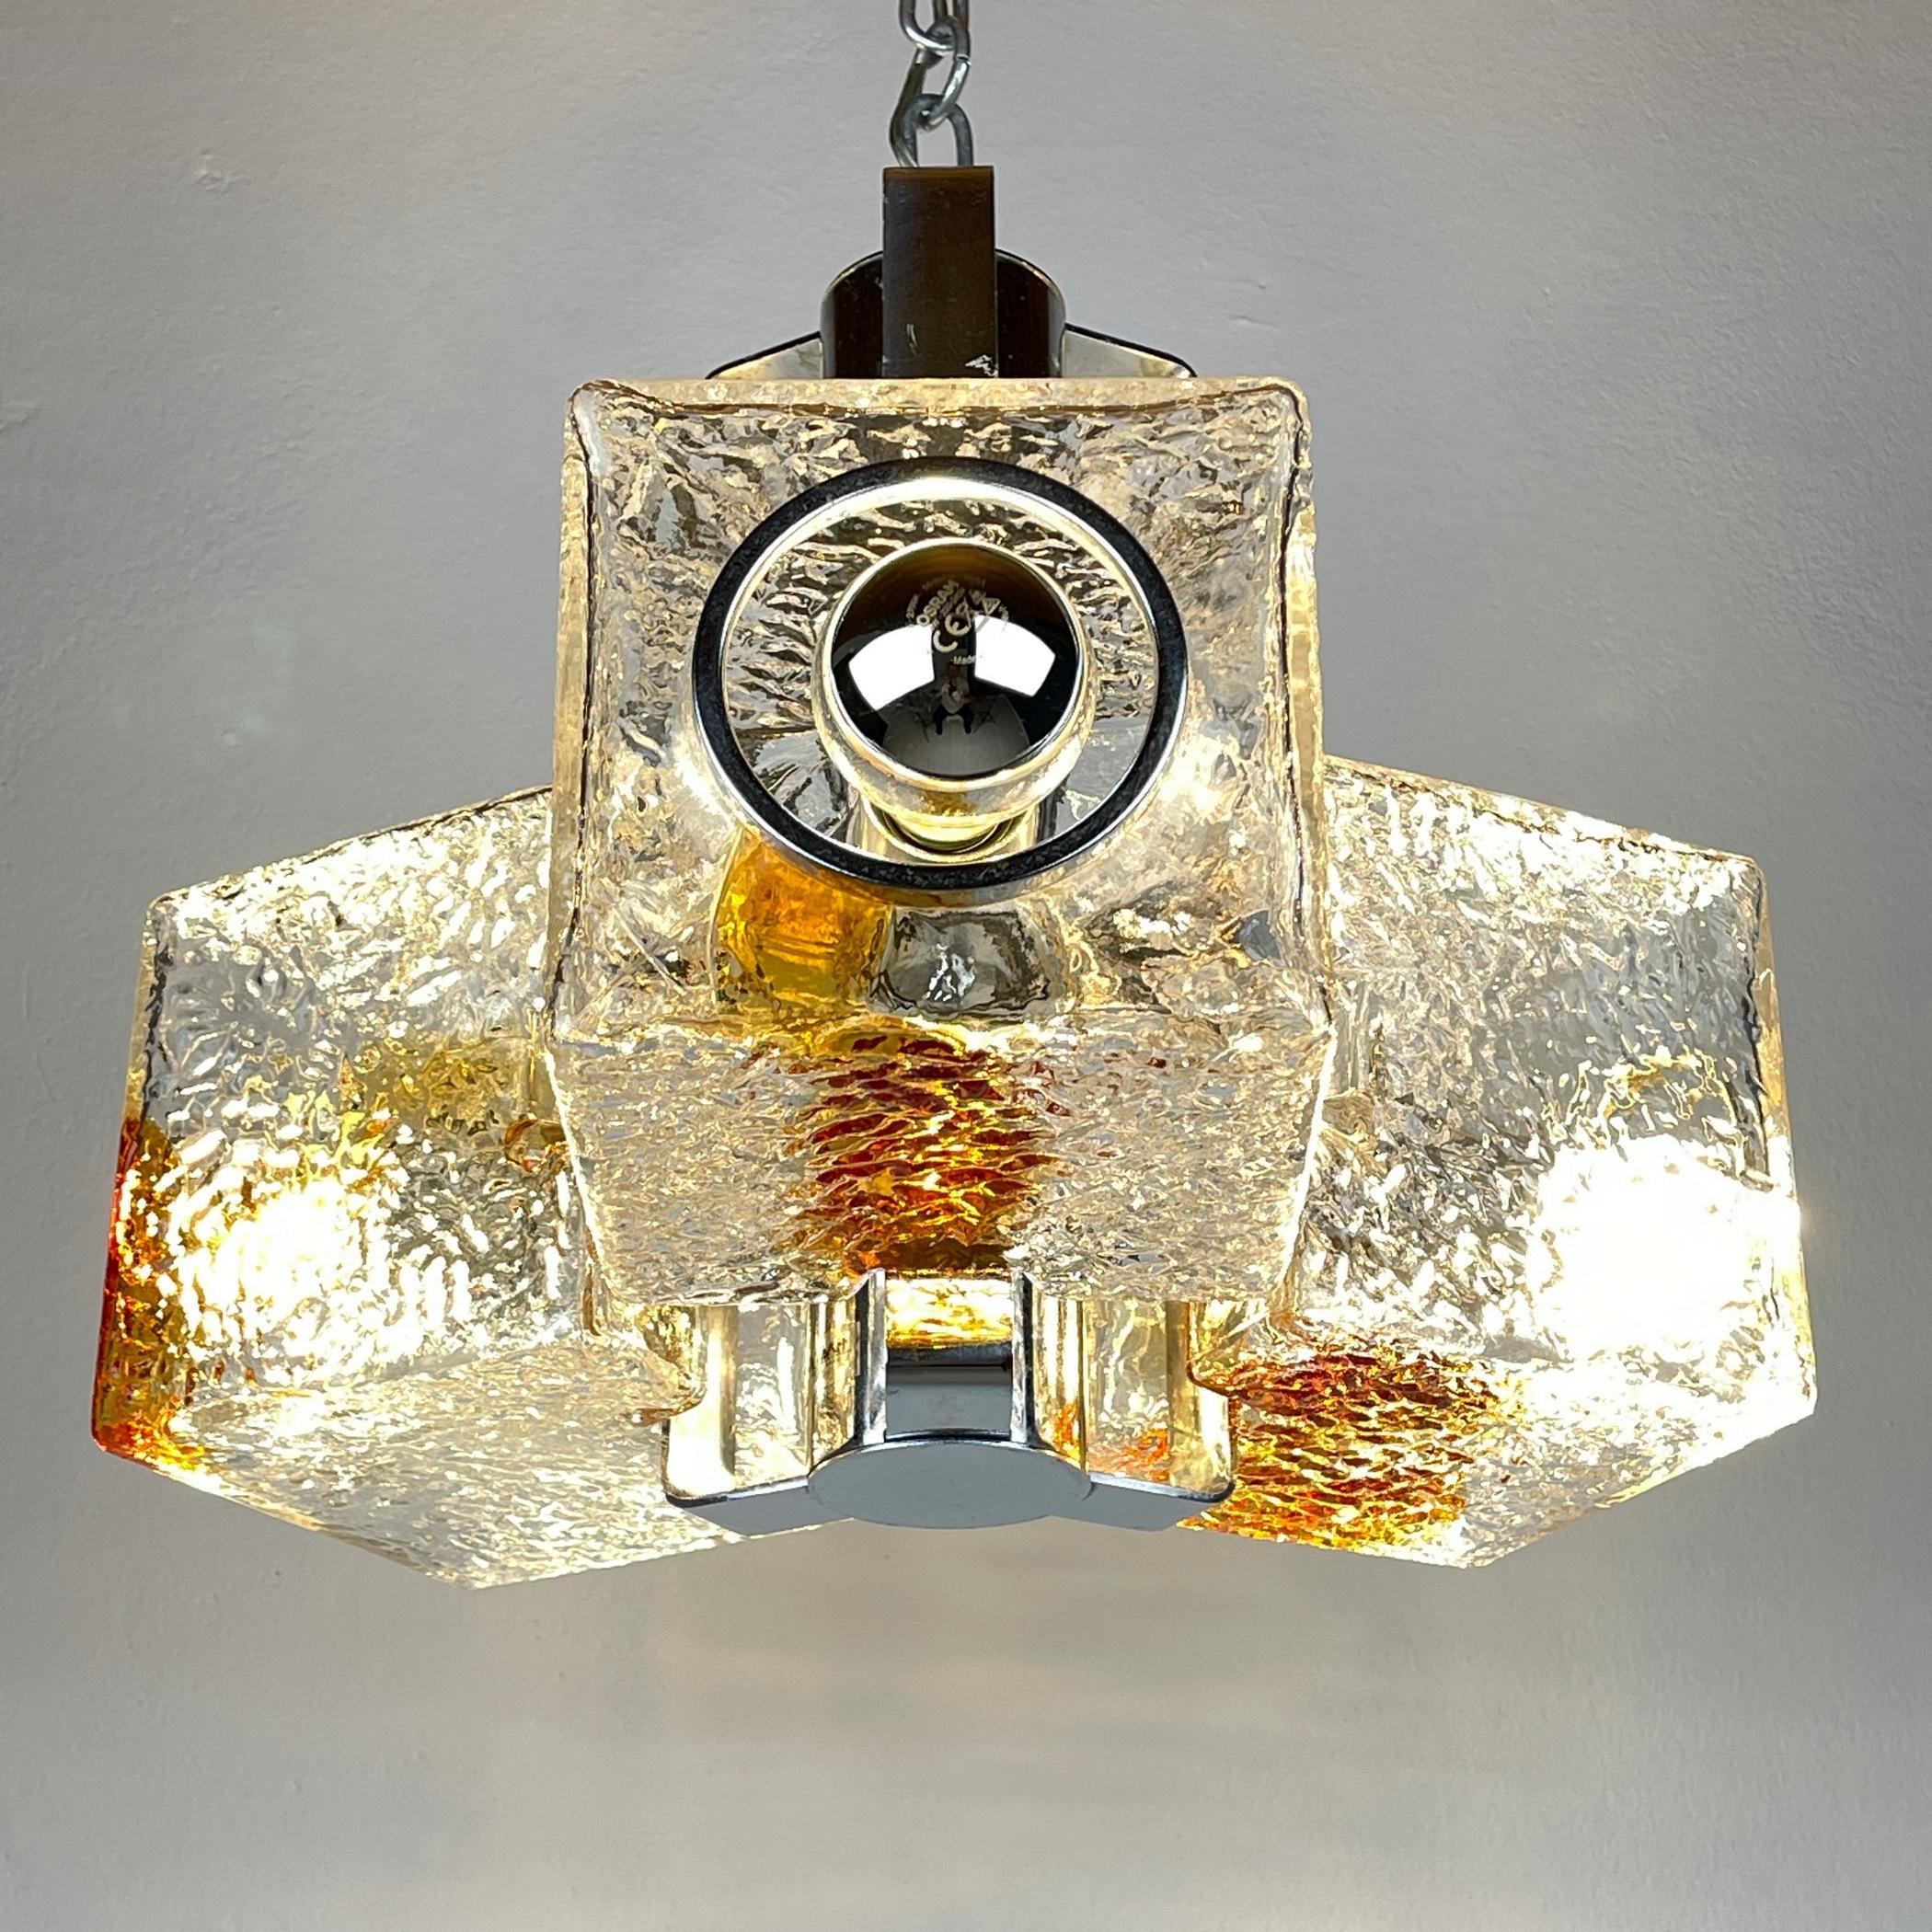 Italian Sculpture Cube Design Murano Chandelier by Toni Zuccheri for VeArt Italy 1970s For Sale